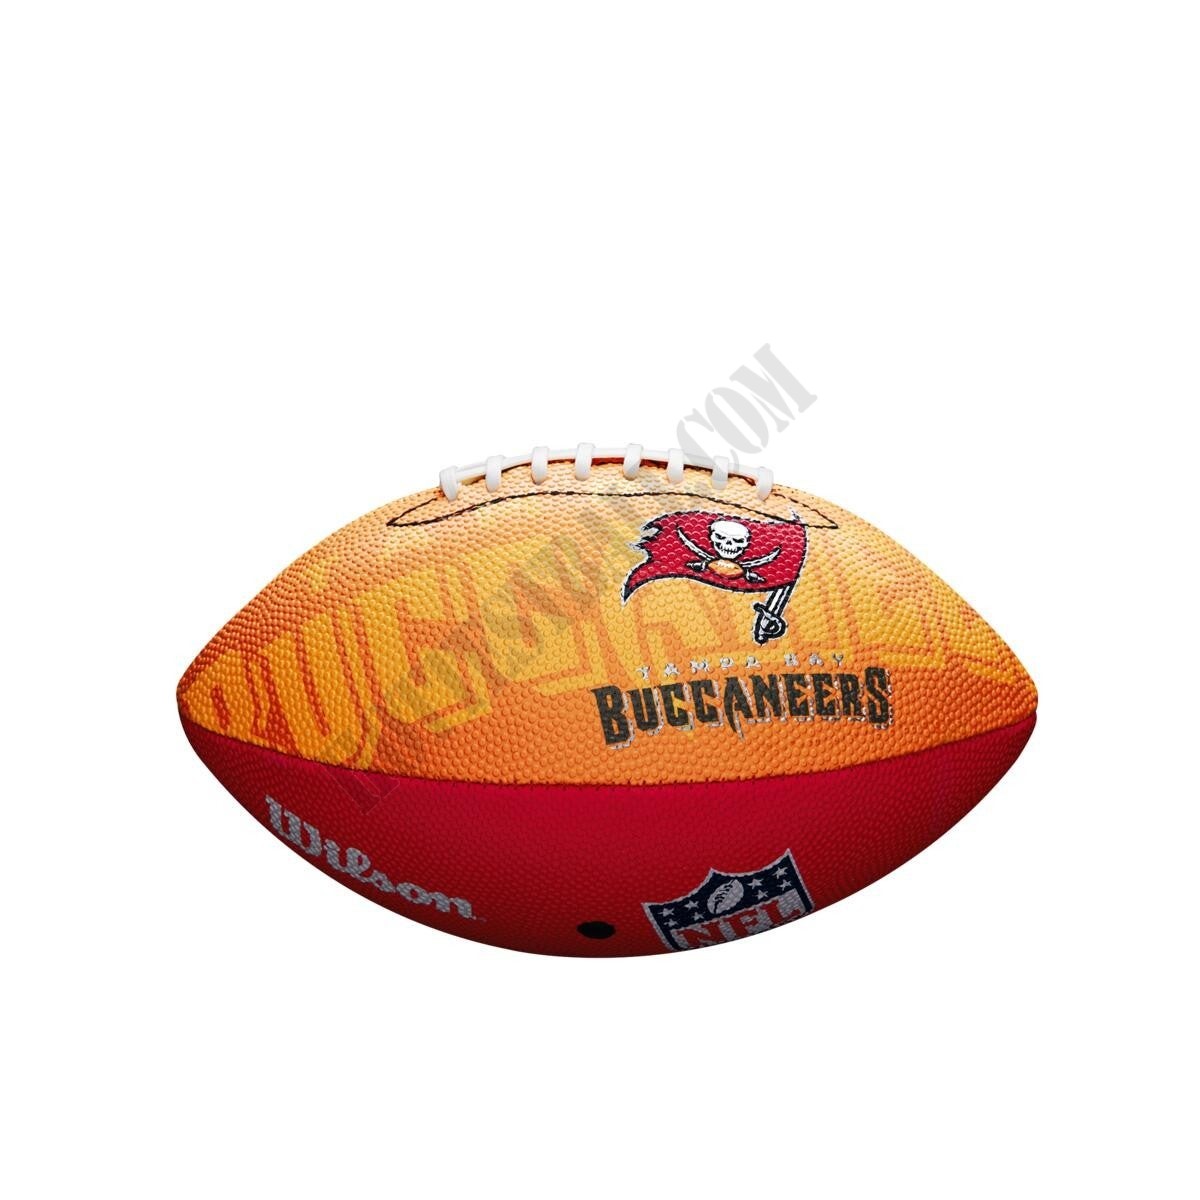 NFL Team Tailgate Football - Tampa Bay Buccaneers ● Wilson Promotions - -1